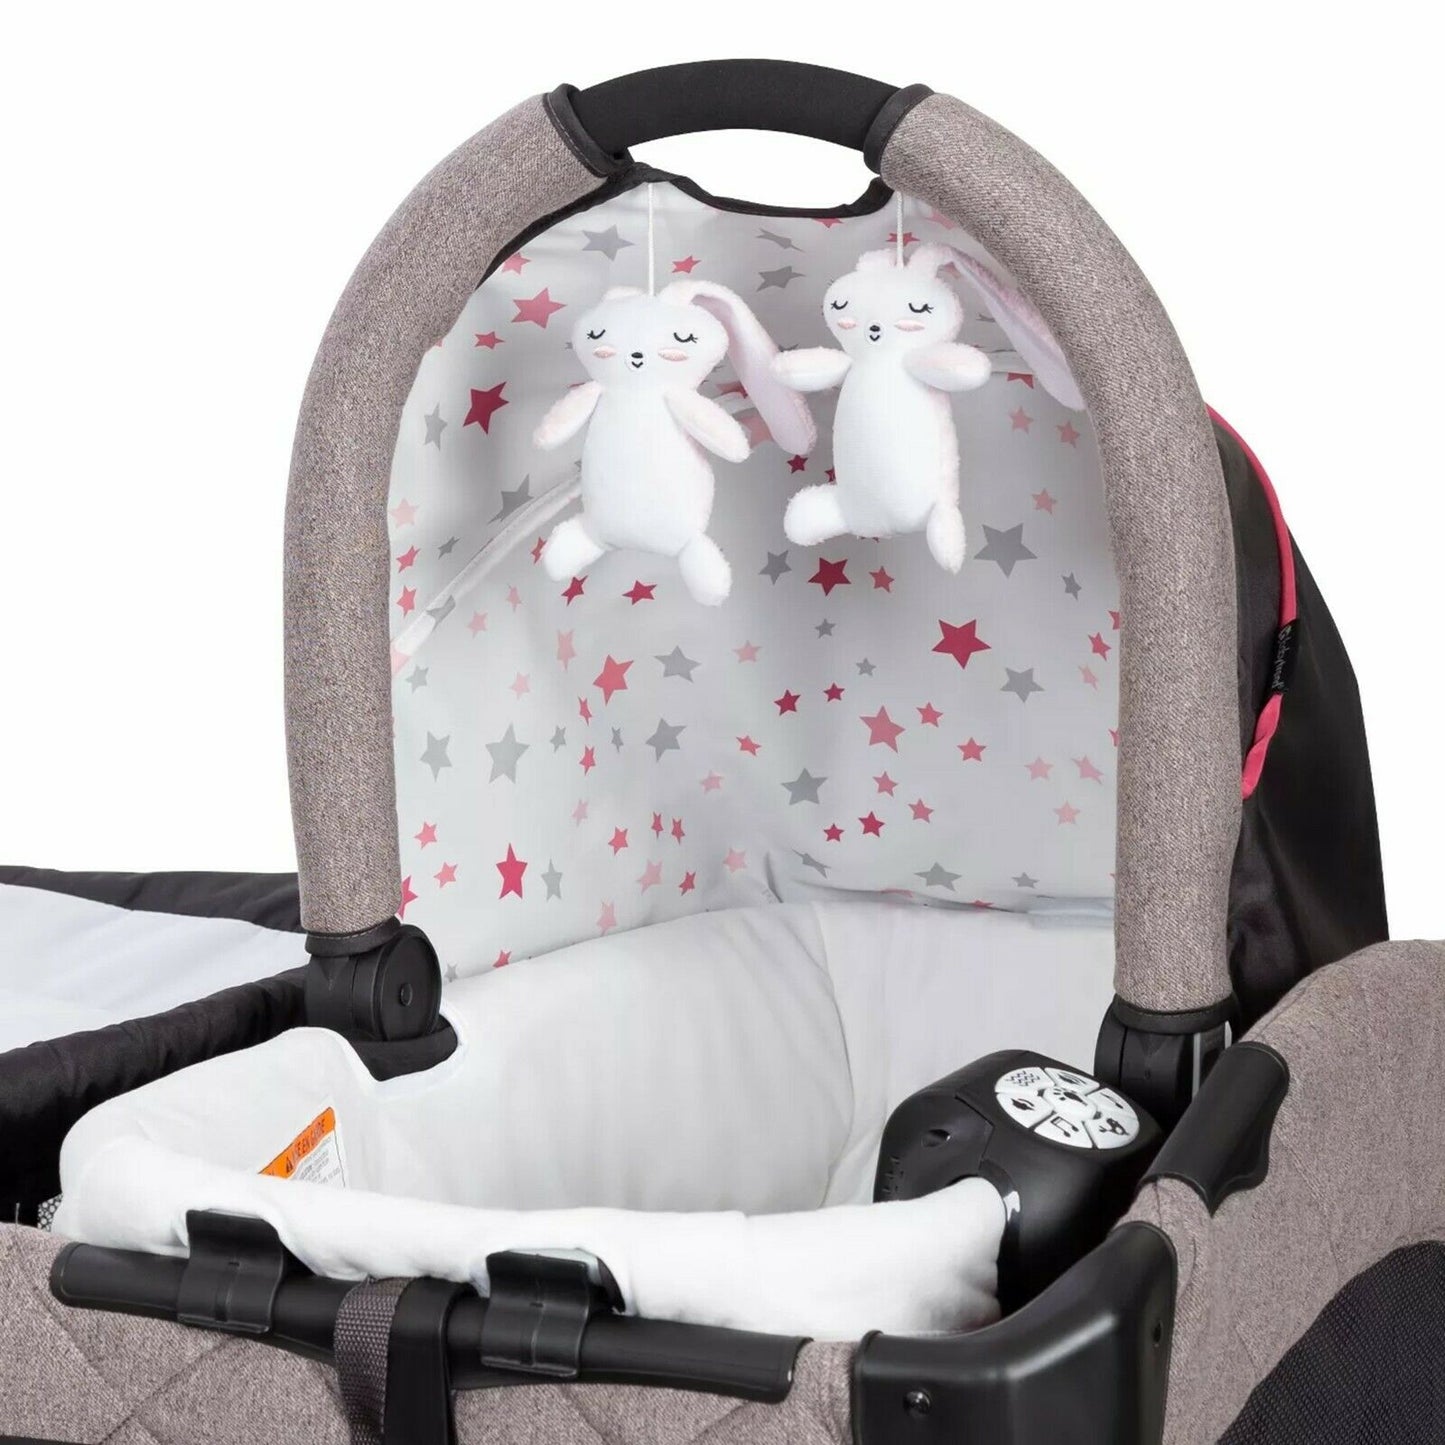 Baby Jogging Stroller with Car Seat Travel System Girls Playard Diaper Bag Combo